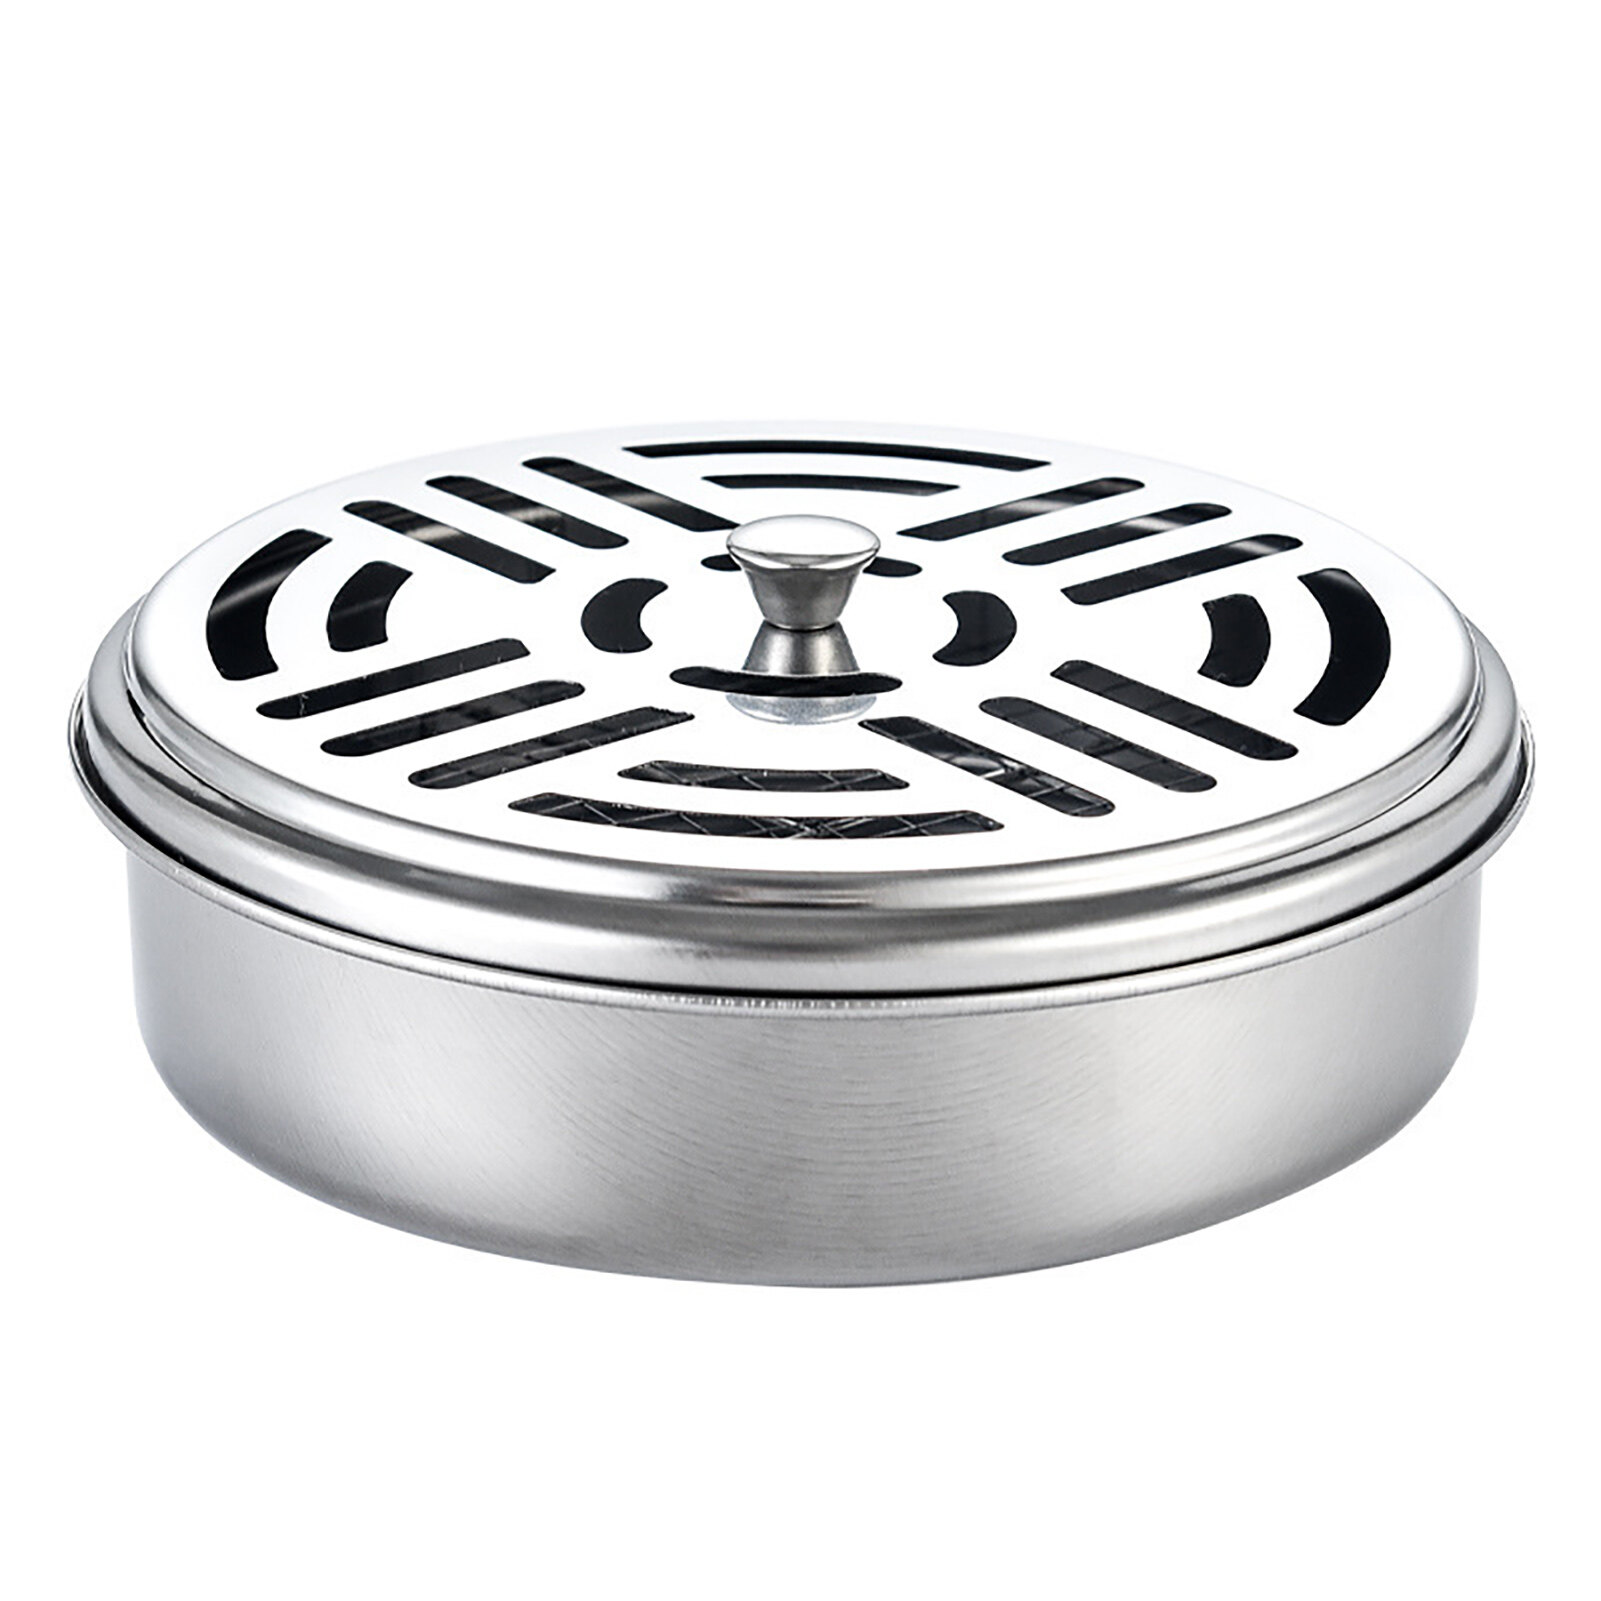 Mosquito Coil Disk Windproof Hollow Design Stable Stainless Steel Mosquito